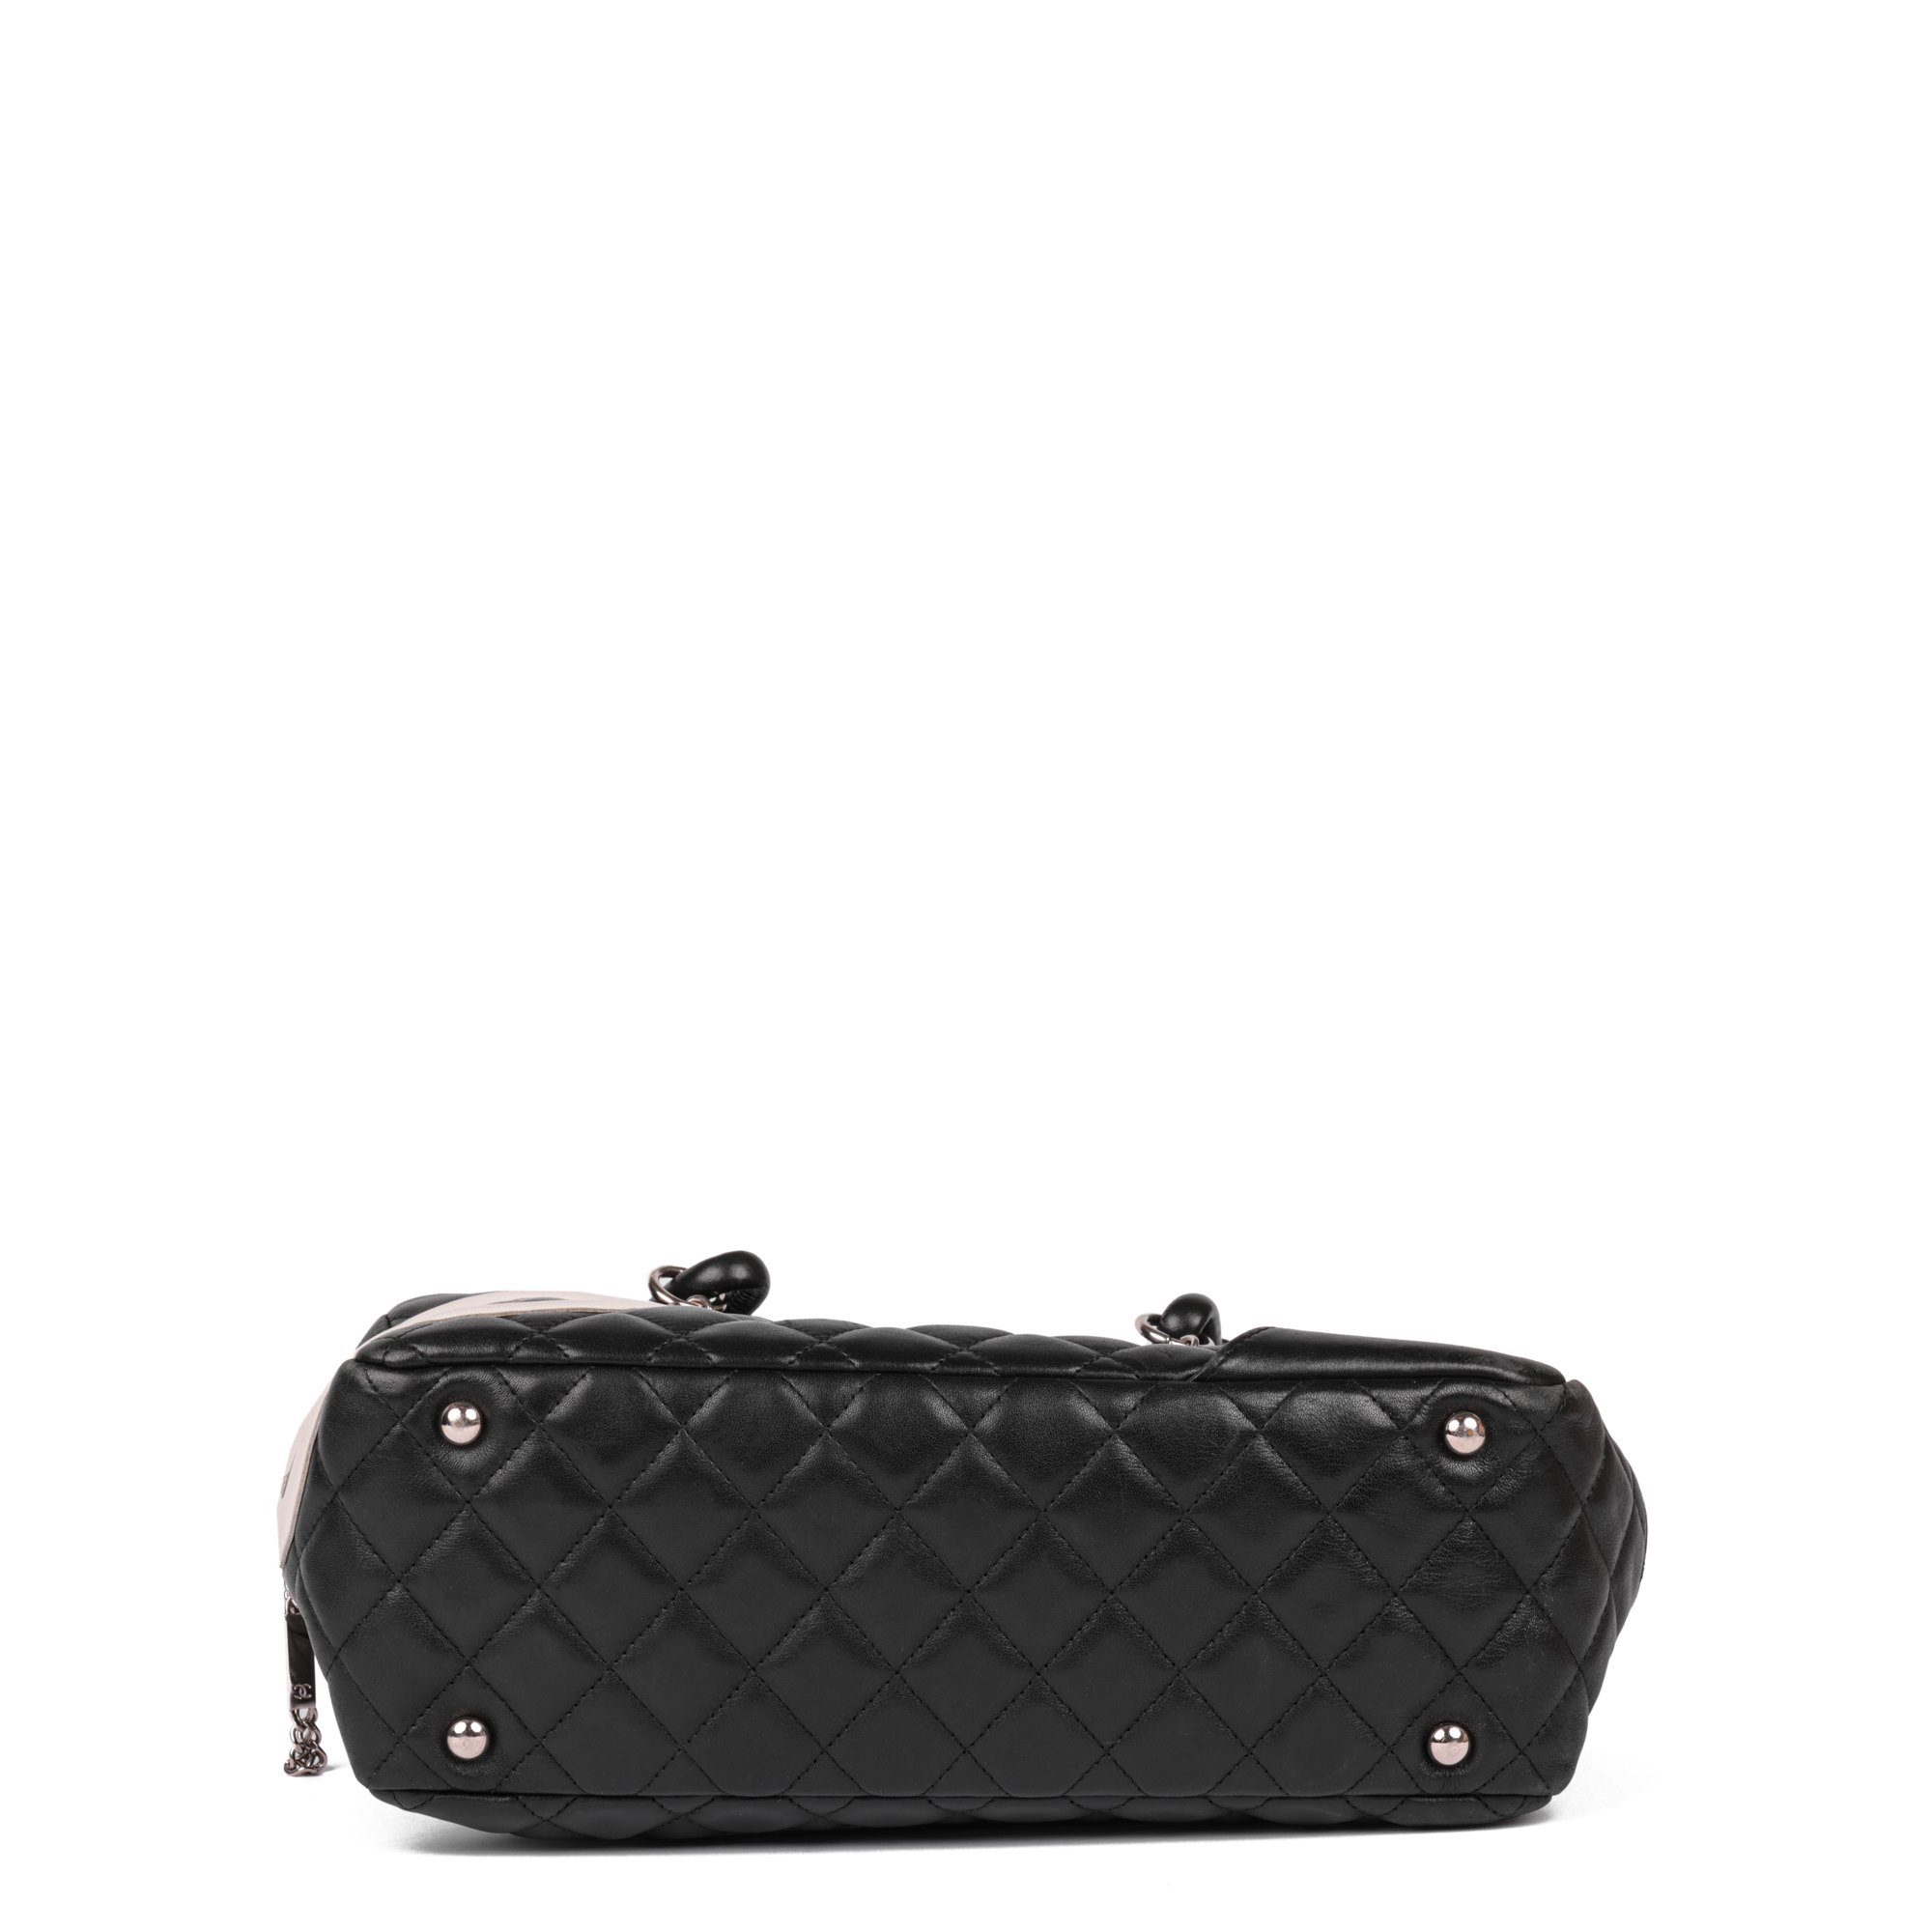 Chanel Black and White Quilted Lambskin Large Cambon Bowling Bag